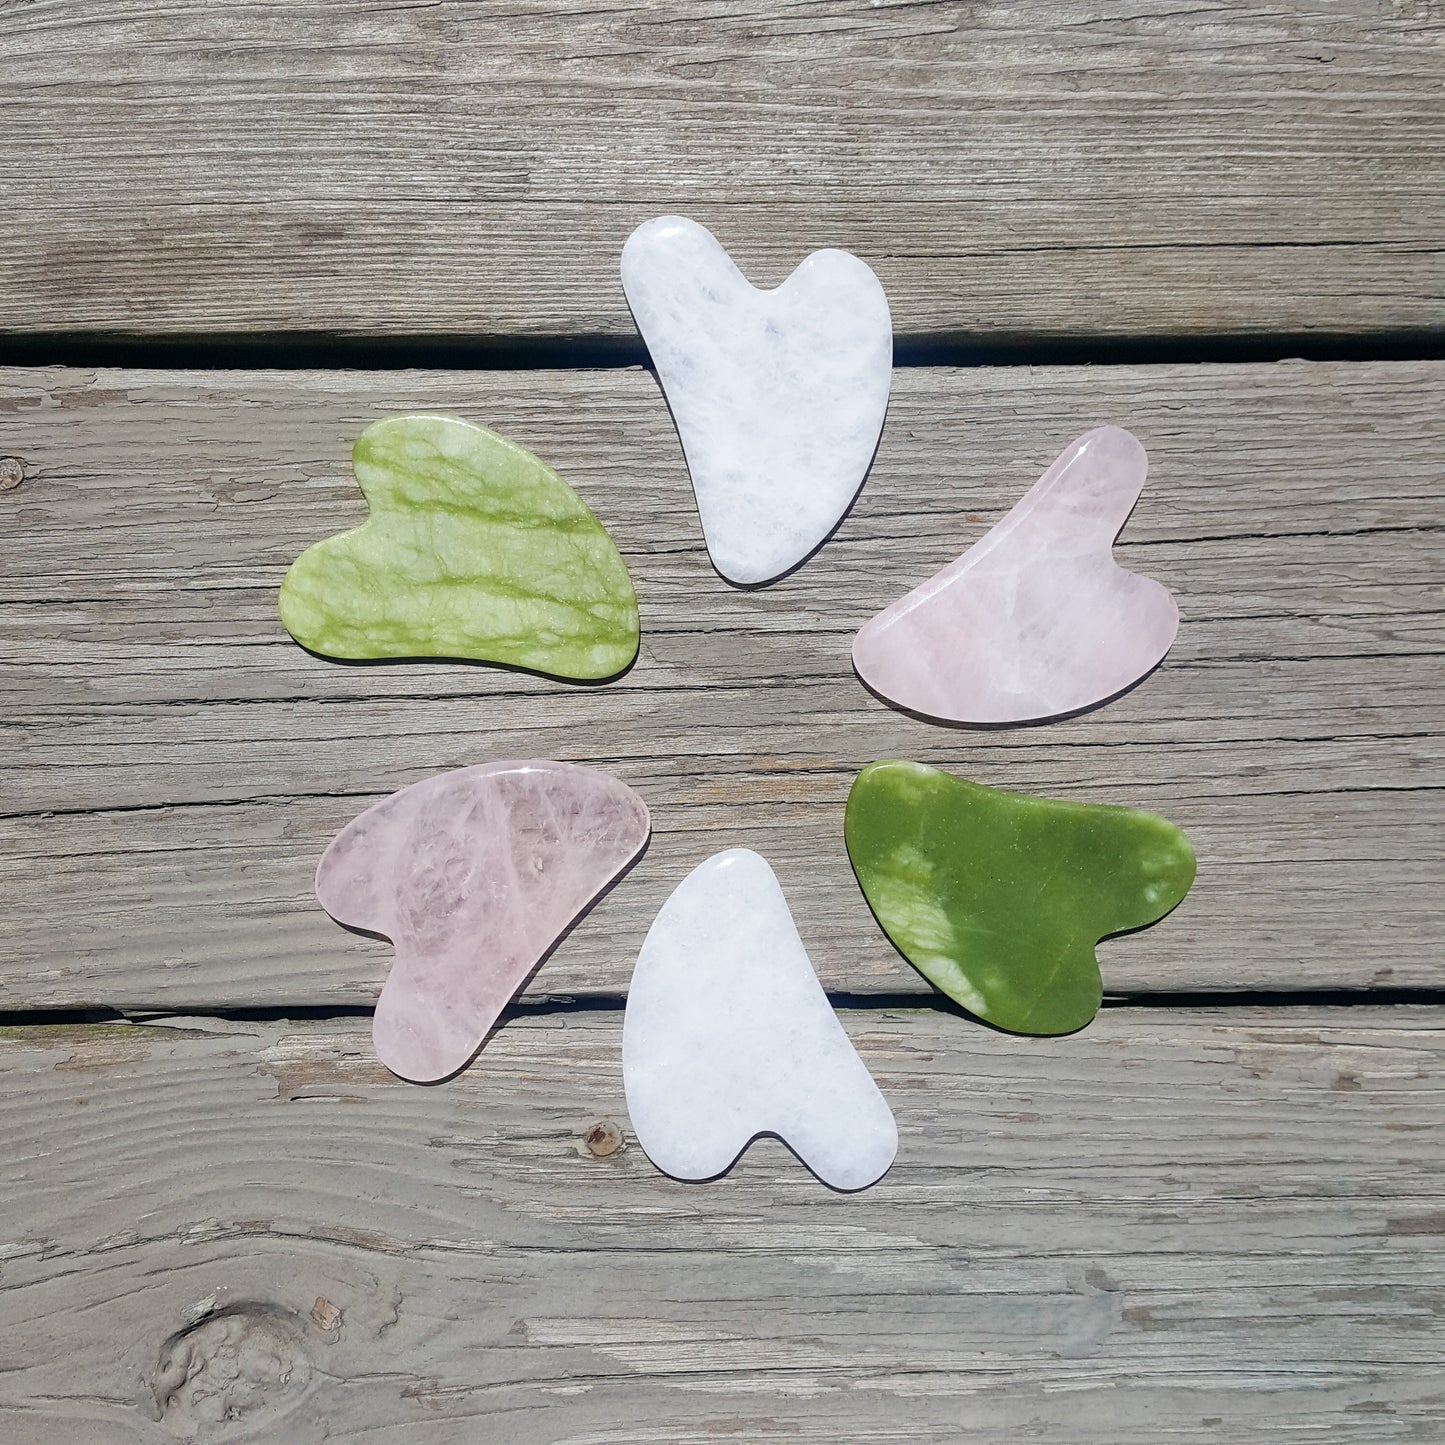 Gua Sha | Real Green and White Jade | Rose Quartz | Natural Stone Gua Sha plus Handmade Red String Good Luck / Protection bracelet